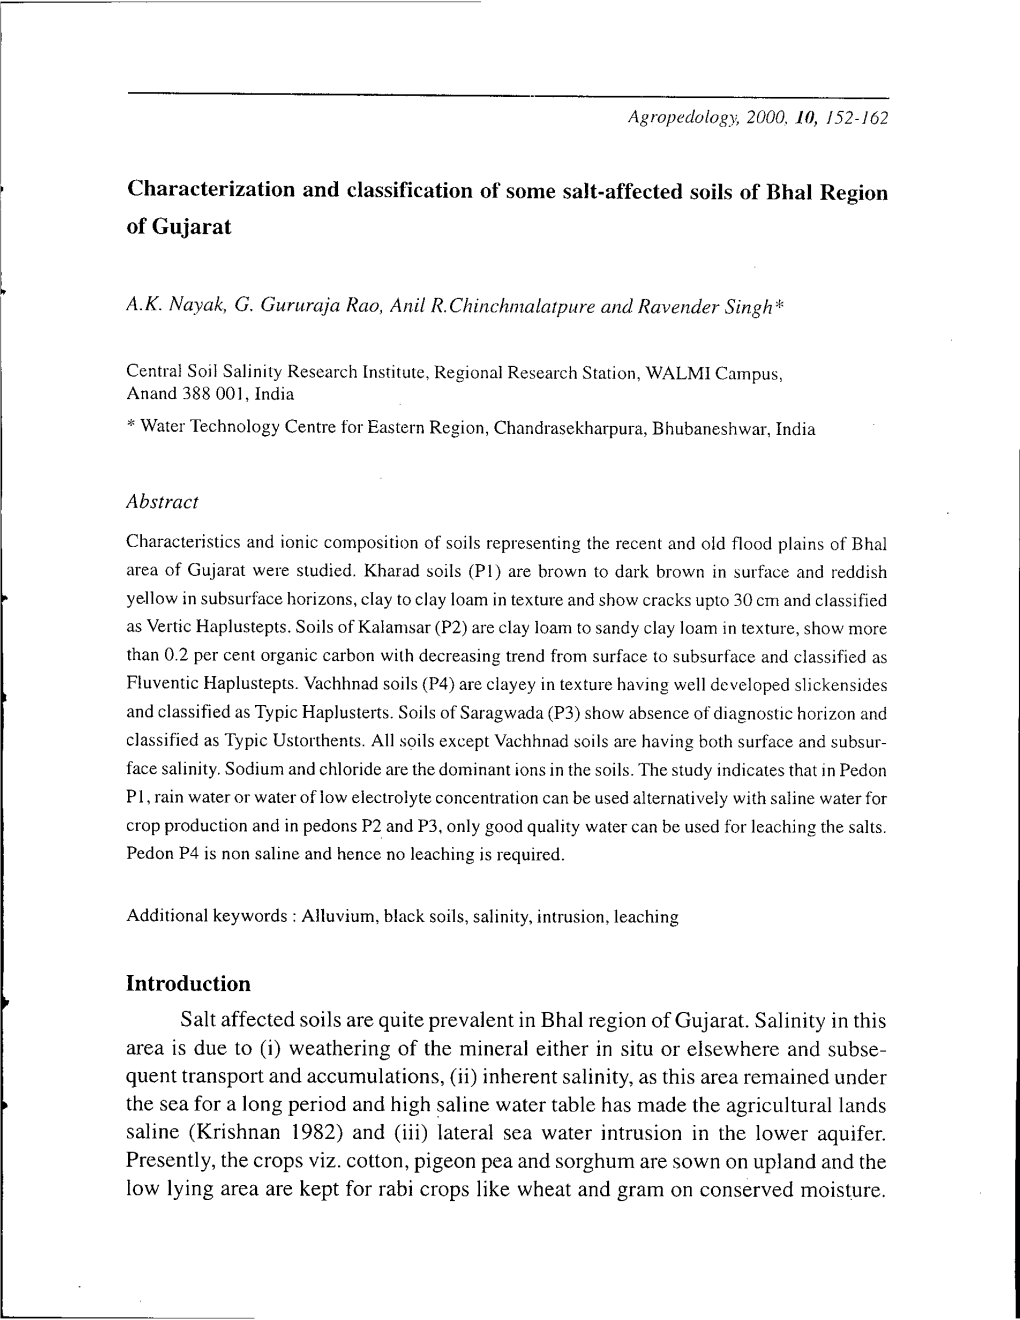 Characterization and Classification of Some Salt-Affected Soils of Bhal Region of Gujarat